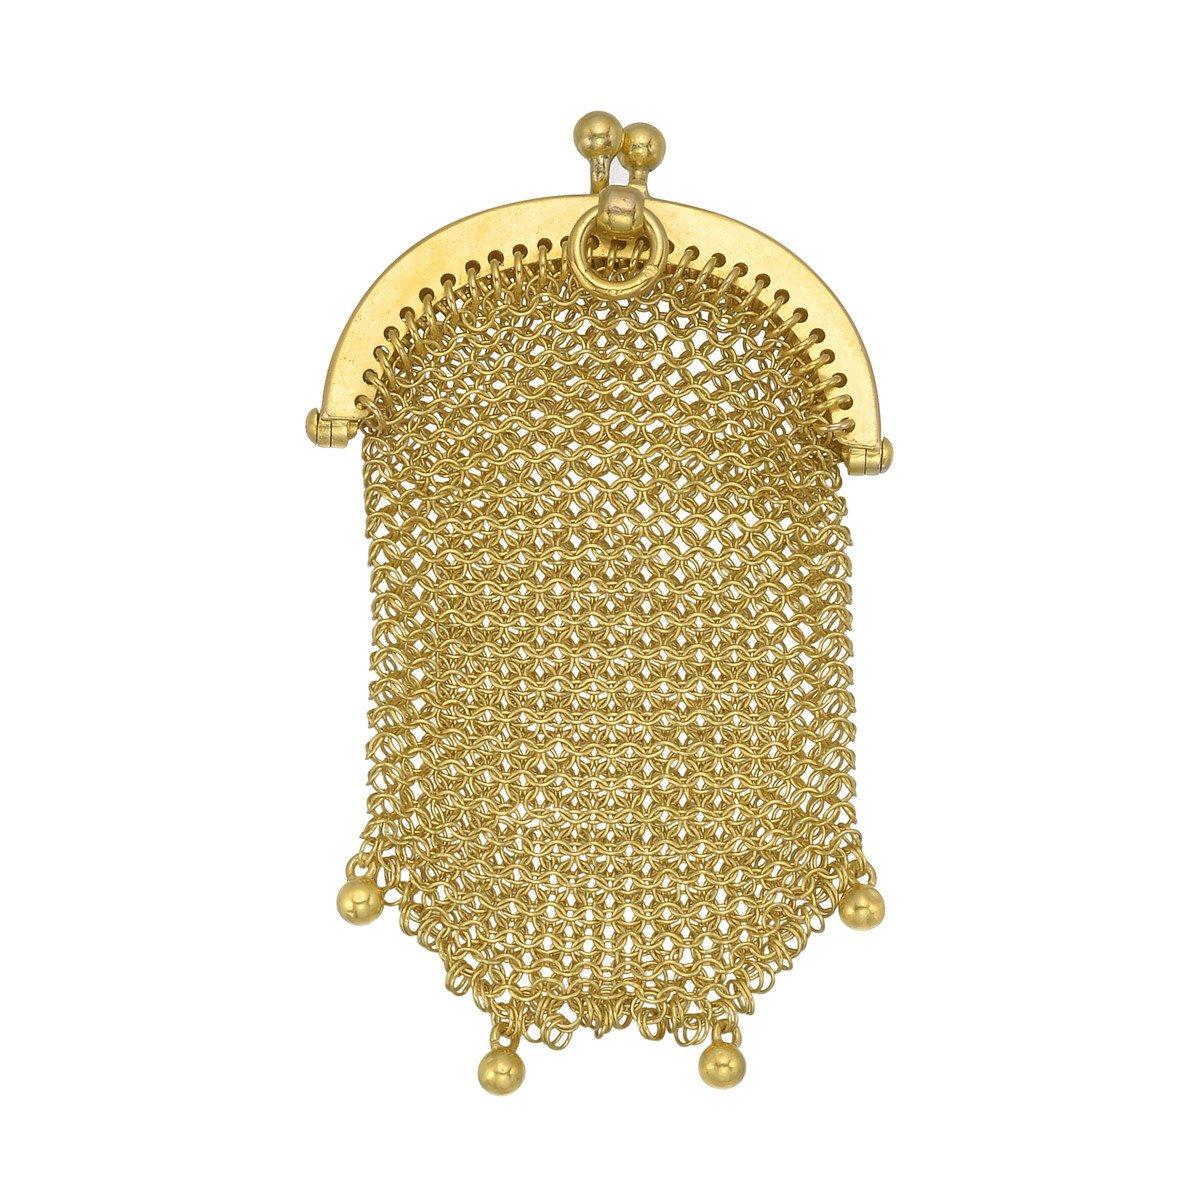 Small mesh coin purse pendant, in 18k yellow gold, with French marks. 2.7